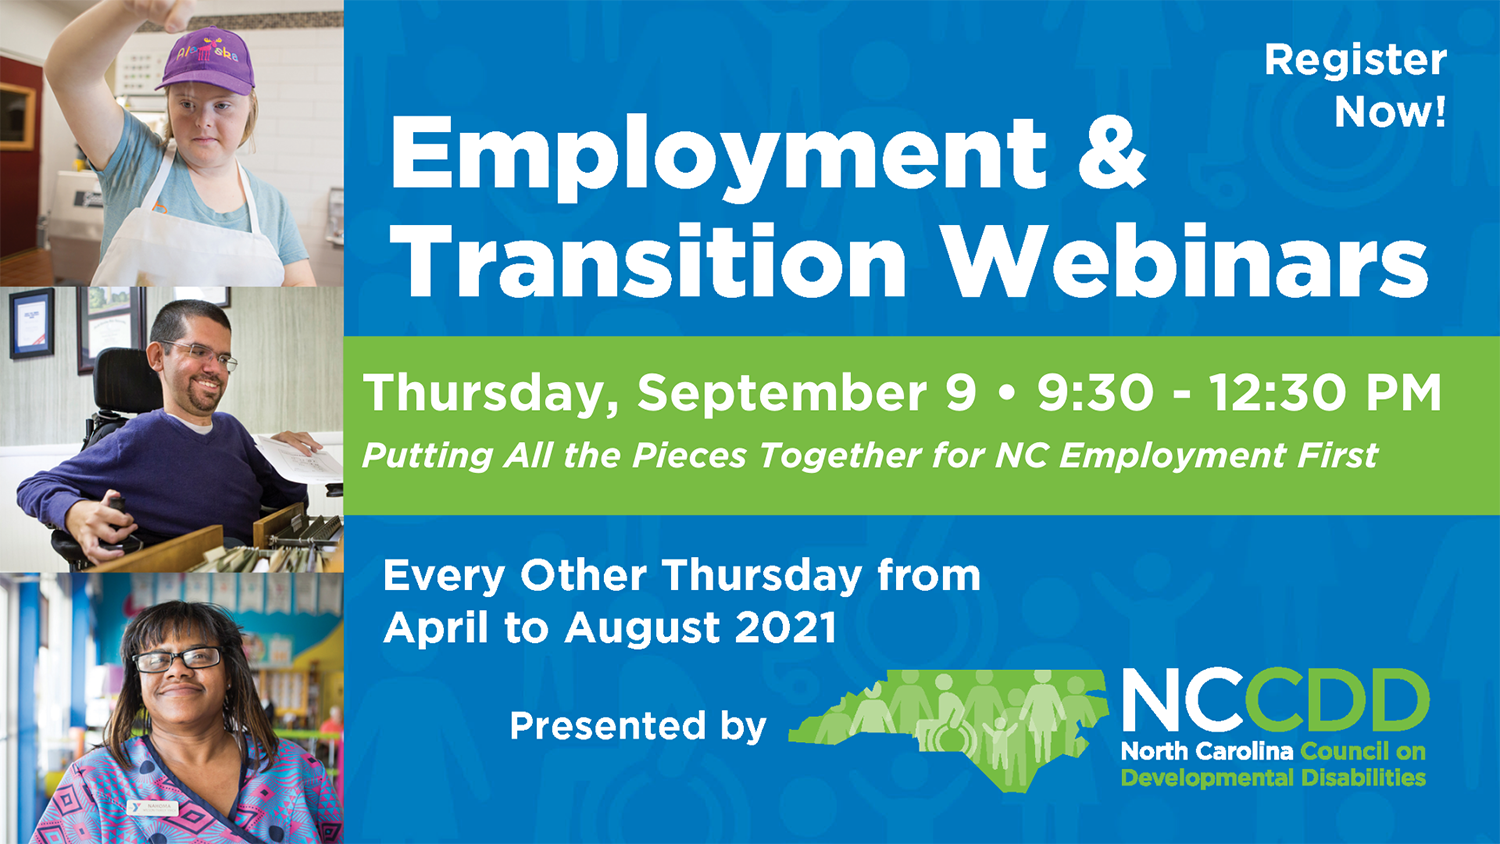 employment and transition webinars: thursday, september 9 at 9:30 - 12:30 pm: putting all the pieces together for NC Employment First. 